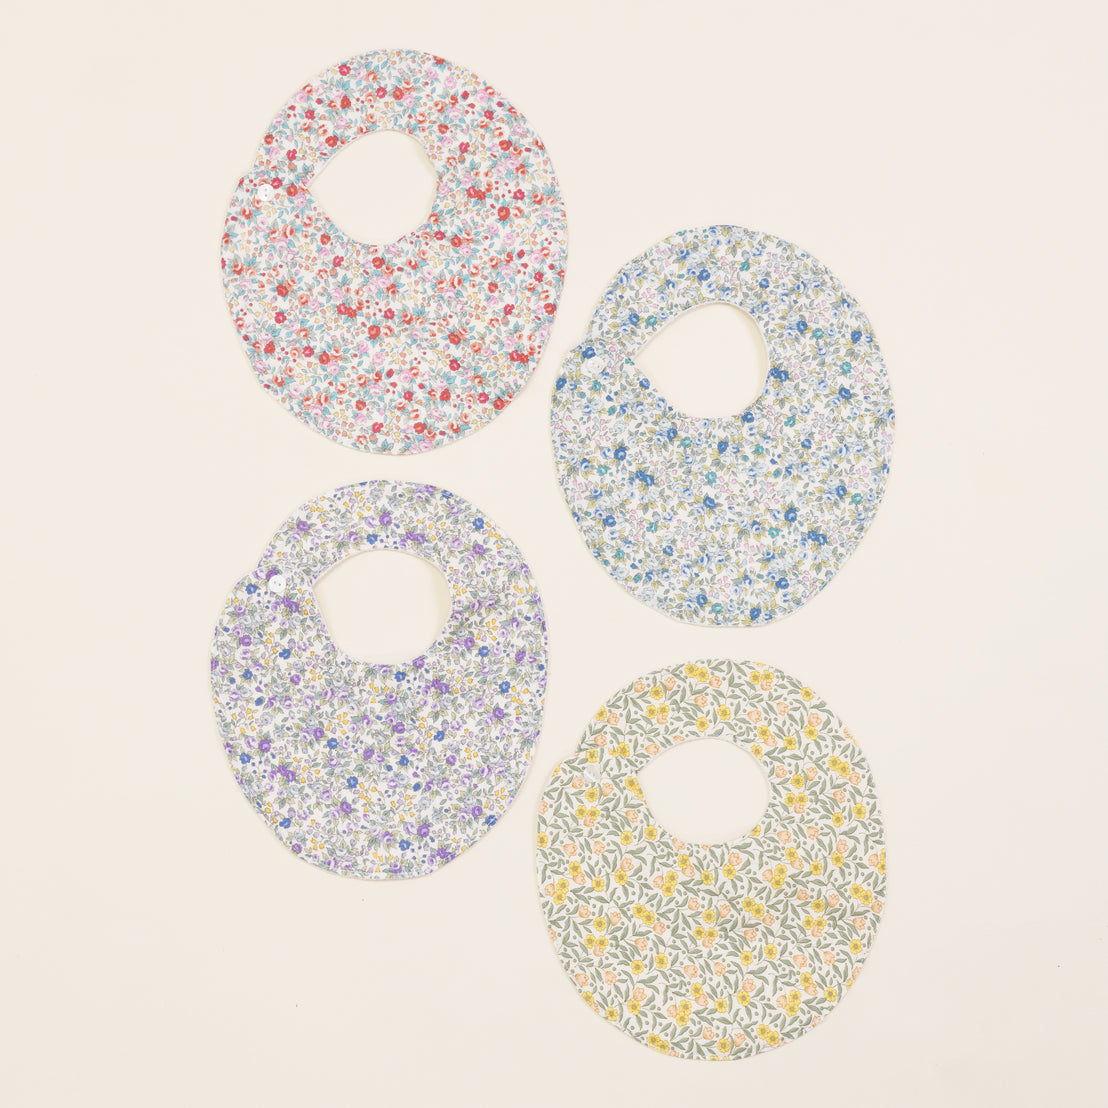 Four Petite Fleur Bibs, each featuring a central hole and a vintage-inspired, upscale disc with floral patterns, arranged in a two-by-two grid on a light background.